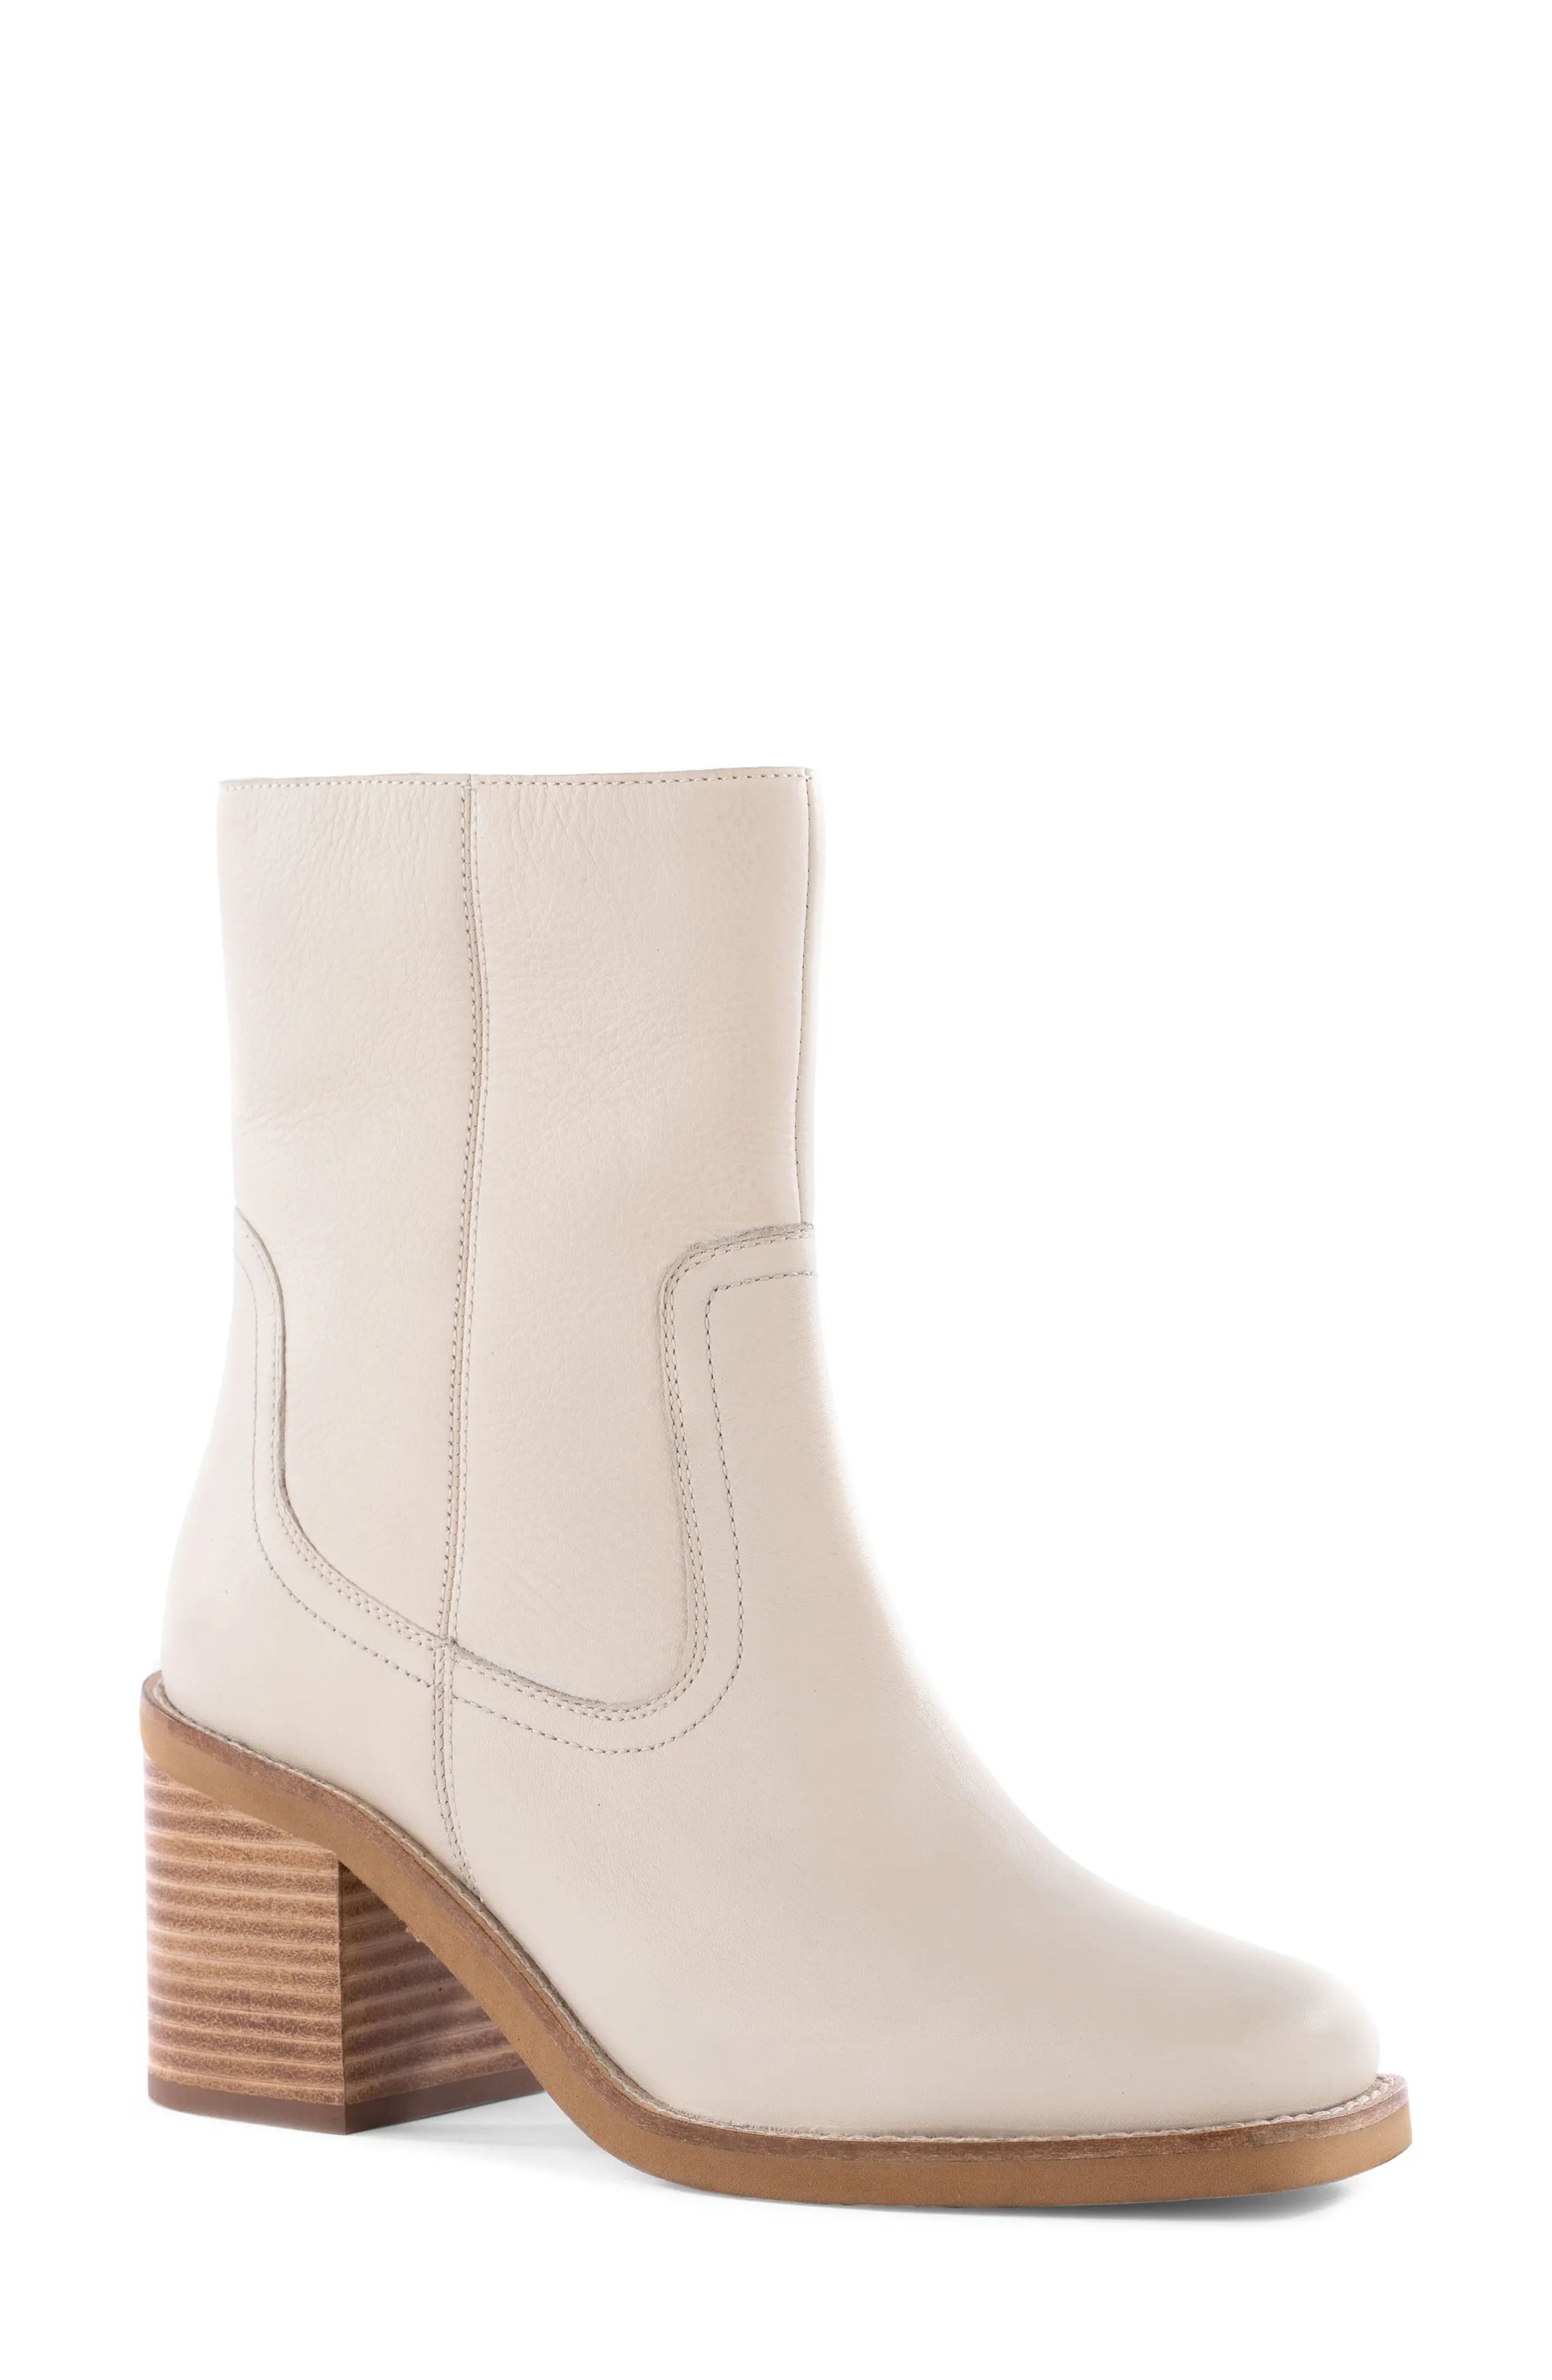 Seychelles Turbulent Boot in Off White Leather at Nordstrom, Size 6 | Nordstrom